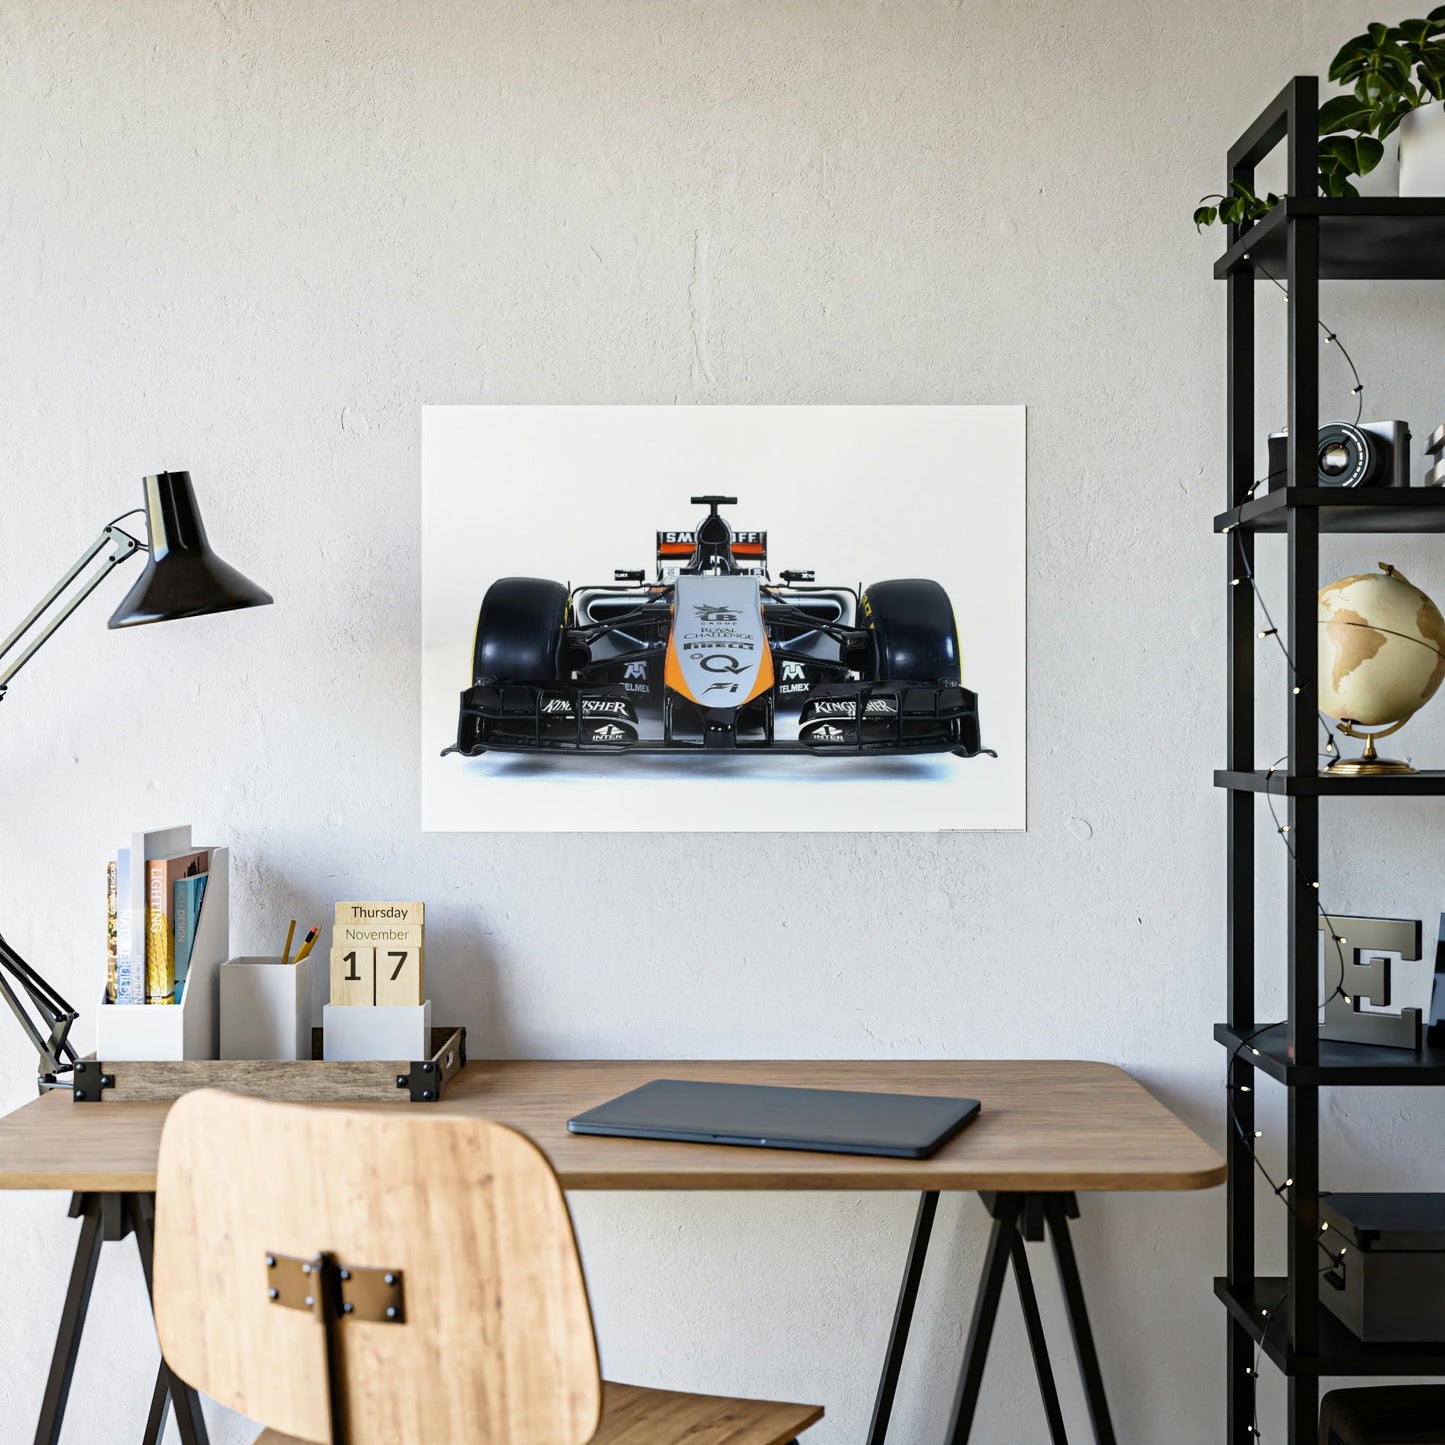 The Need for Speed: Framed Canvas Print of F1 Cars